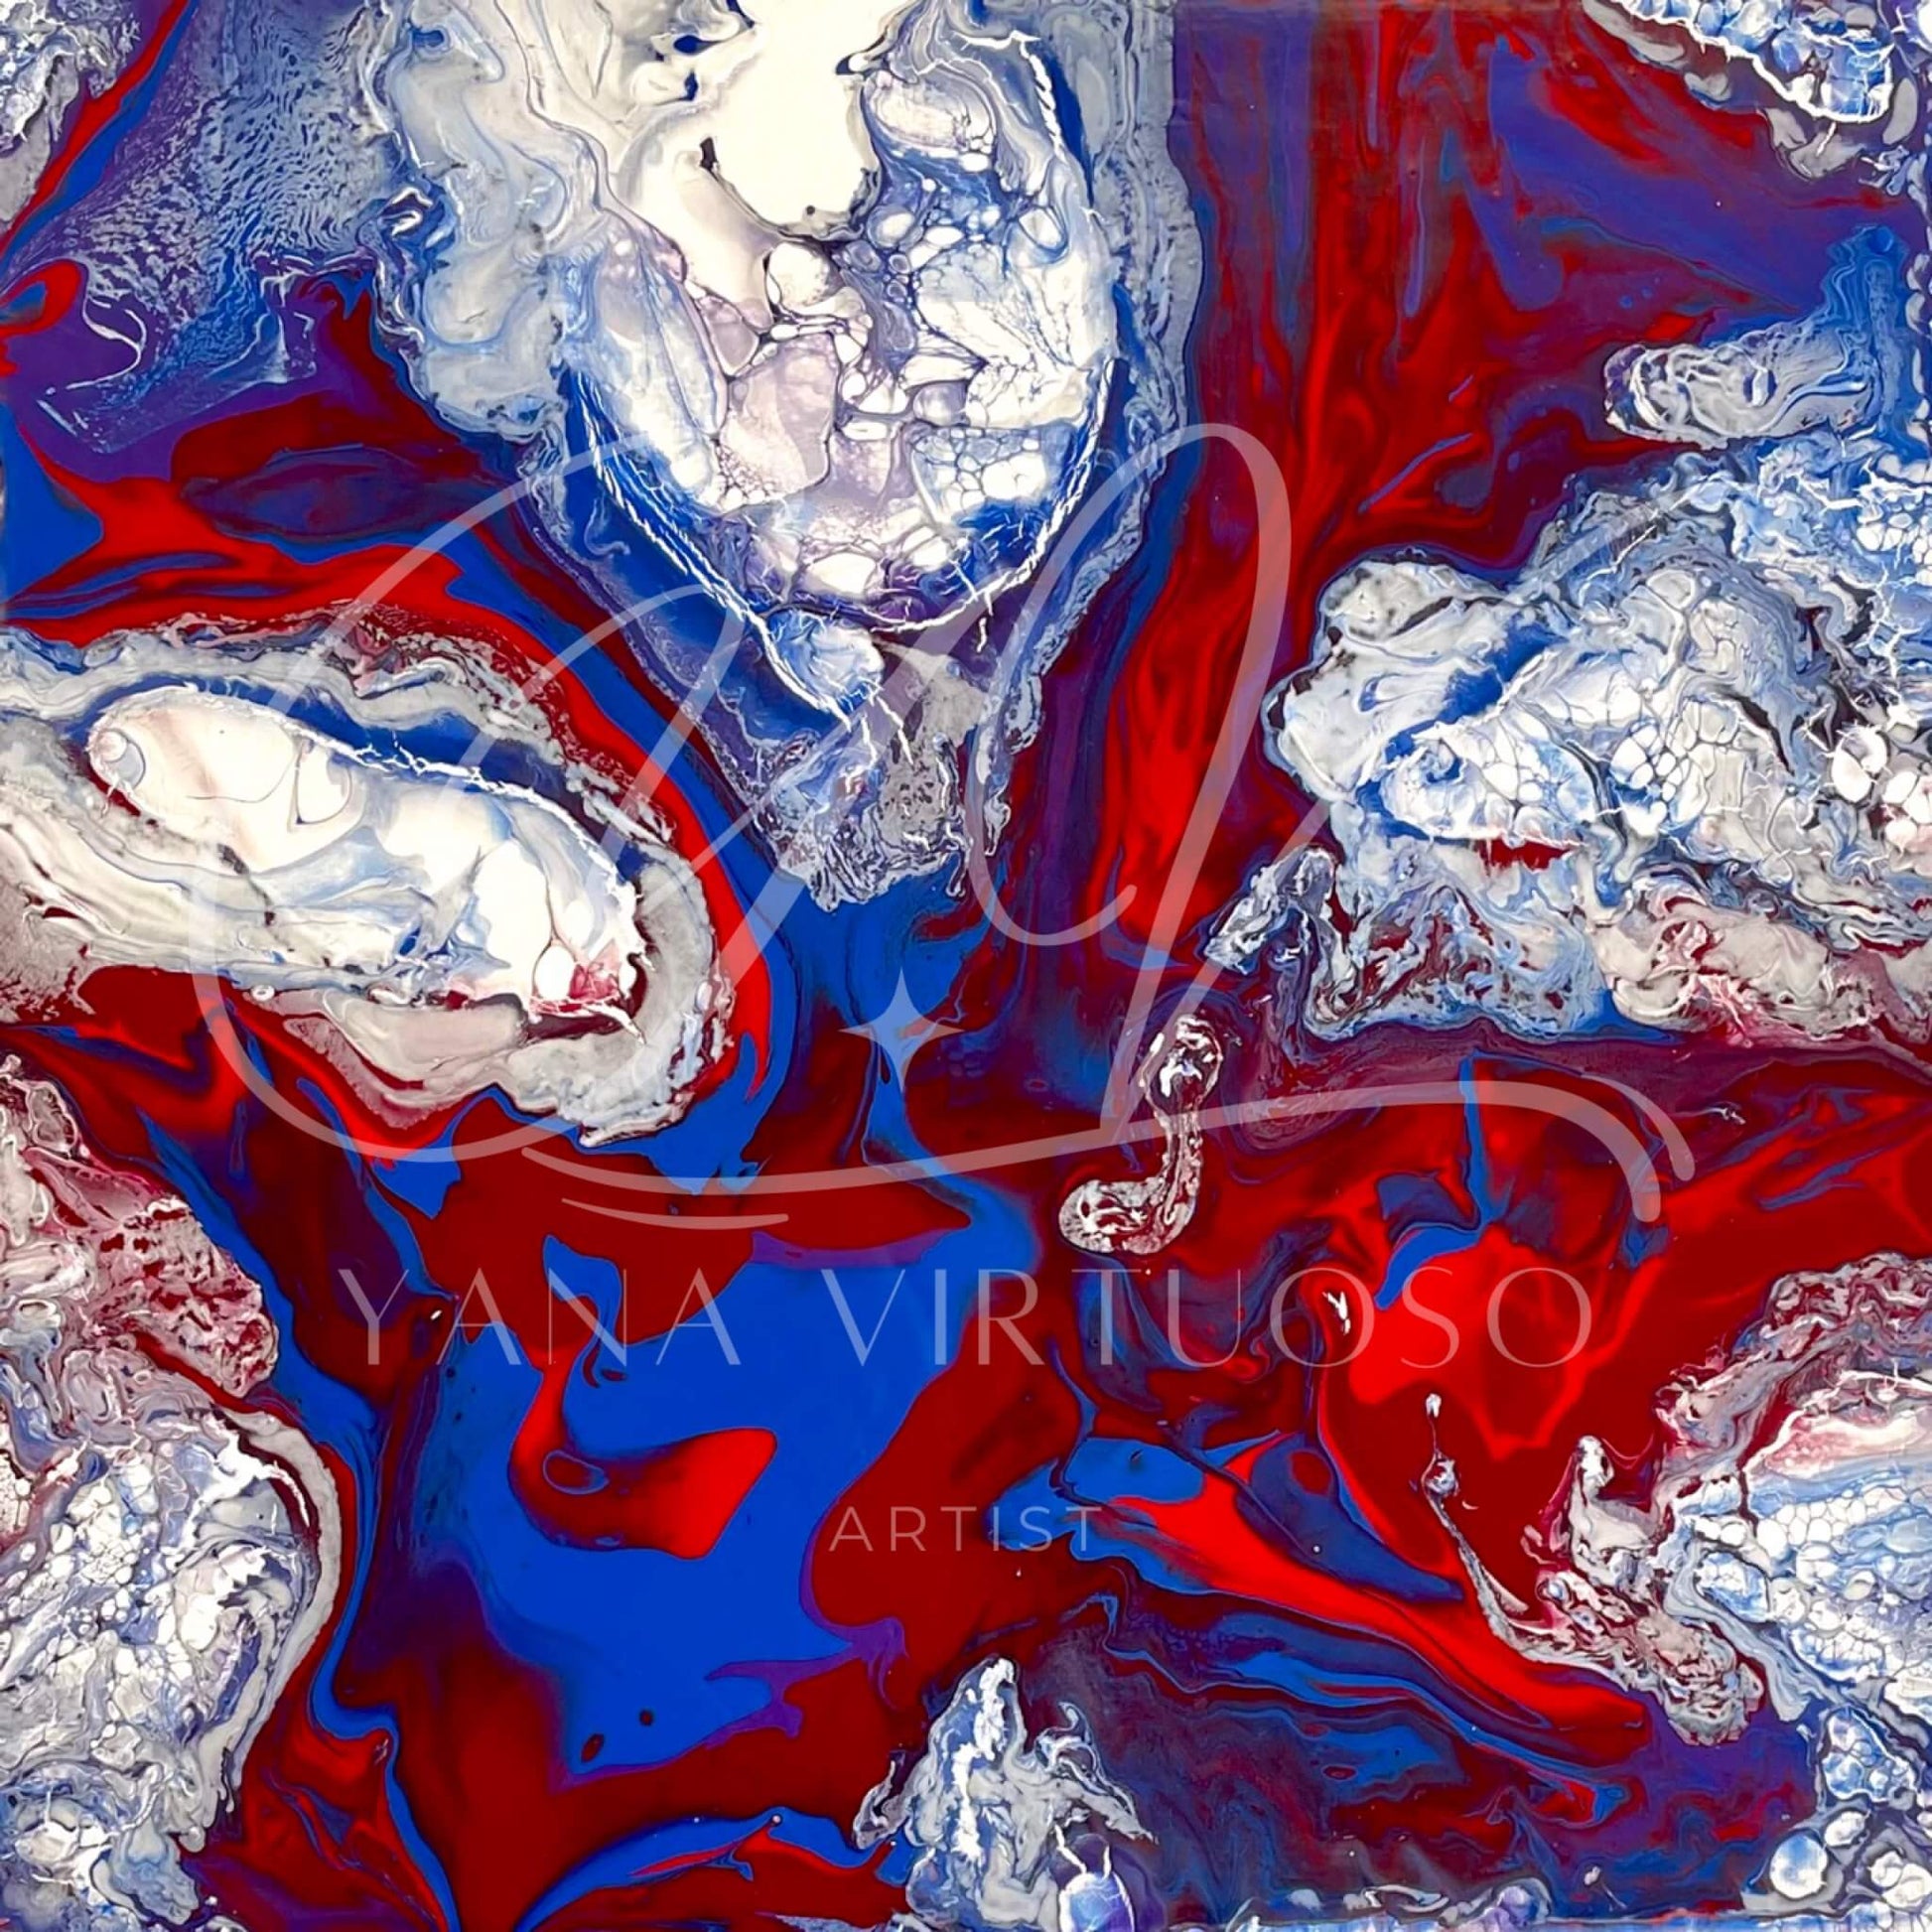 Close-up view of "Mountain Rivers" painting highlighting the intricate details of the fluid art technique and vibrant interplay of red and blue hues depicting mountains and rivers.